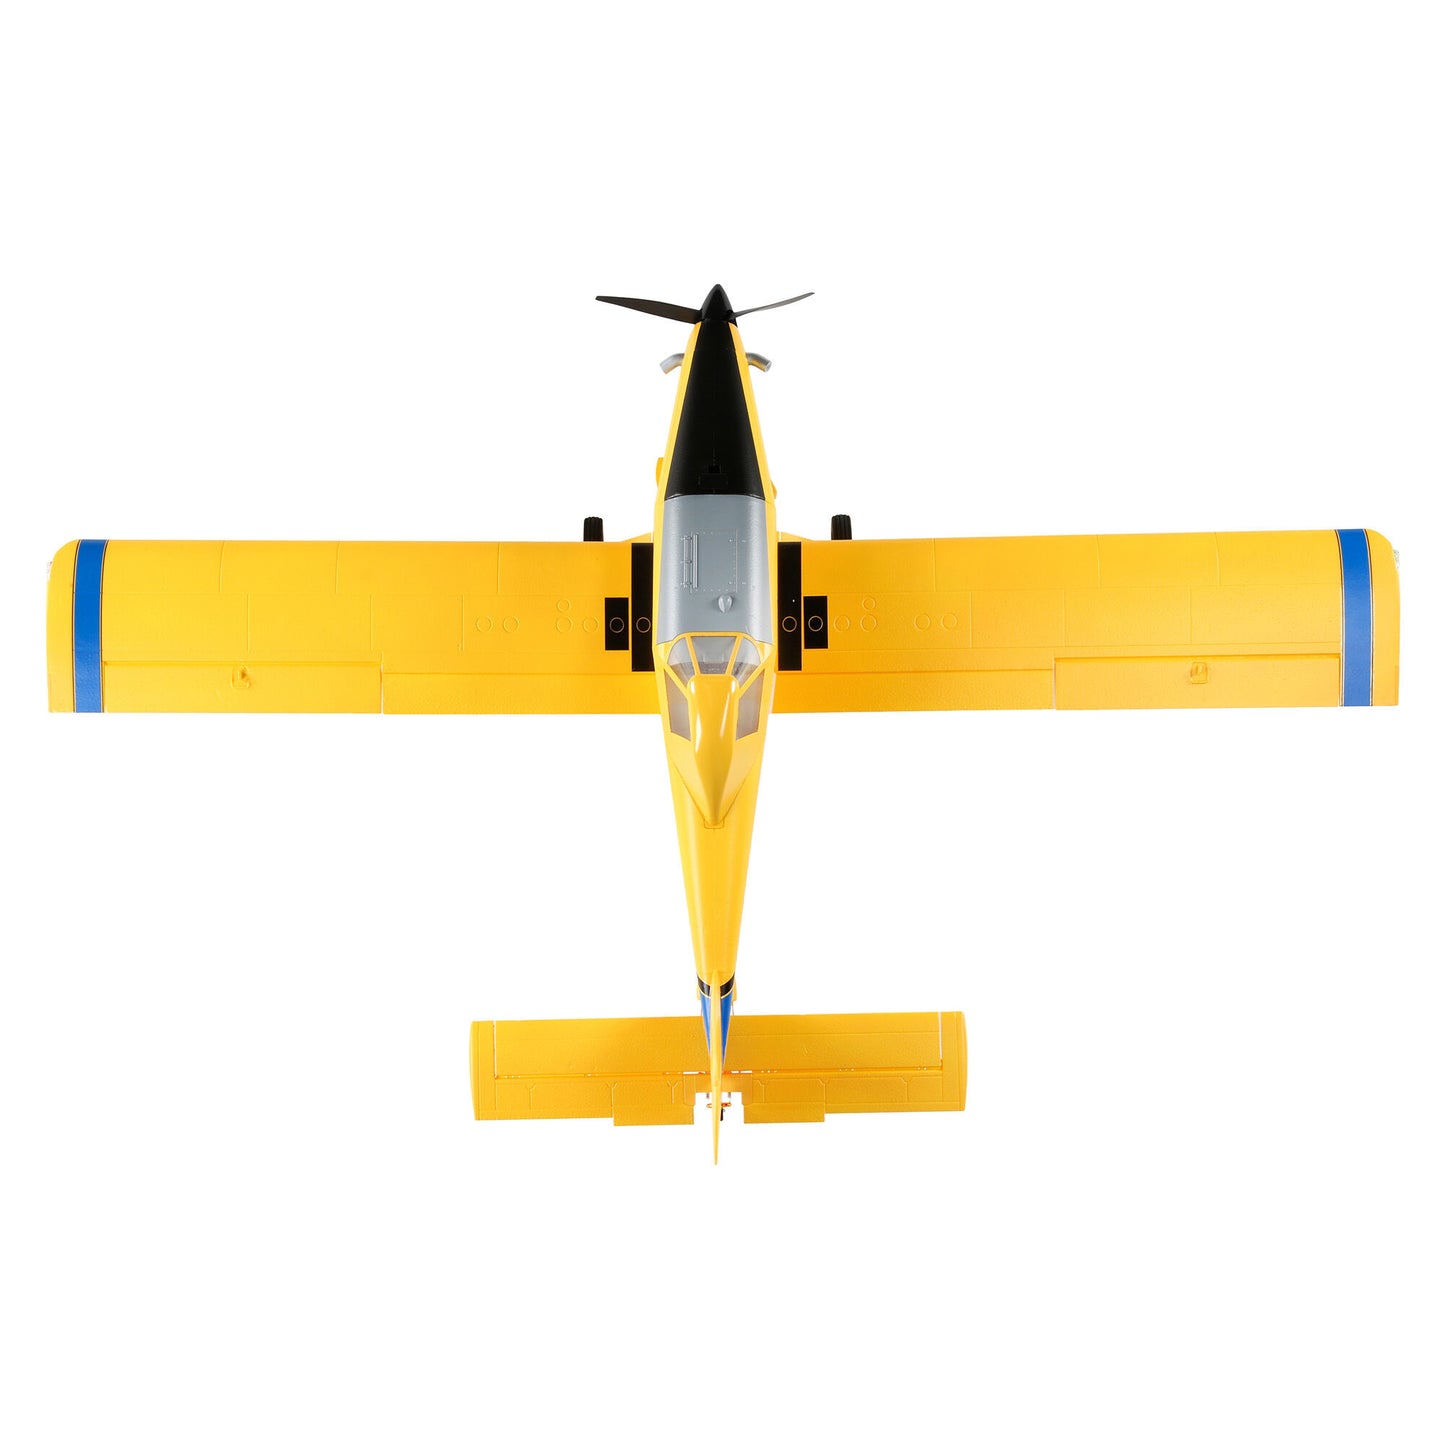 E-Flite Air Tractor 1.5m BNF Basic with AS3X & SAFE Select